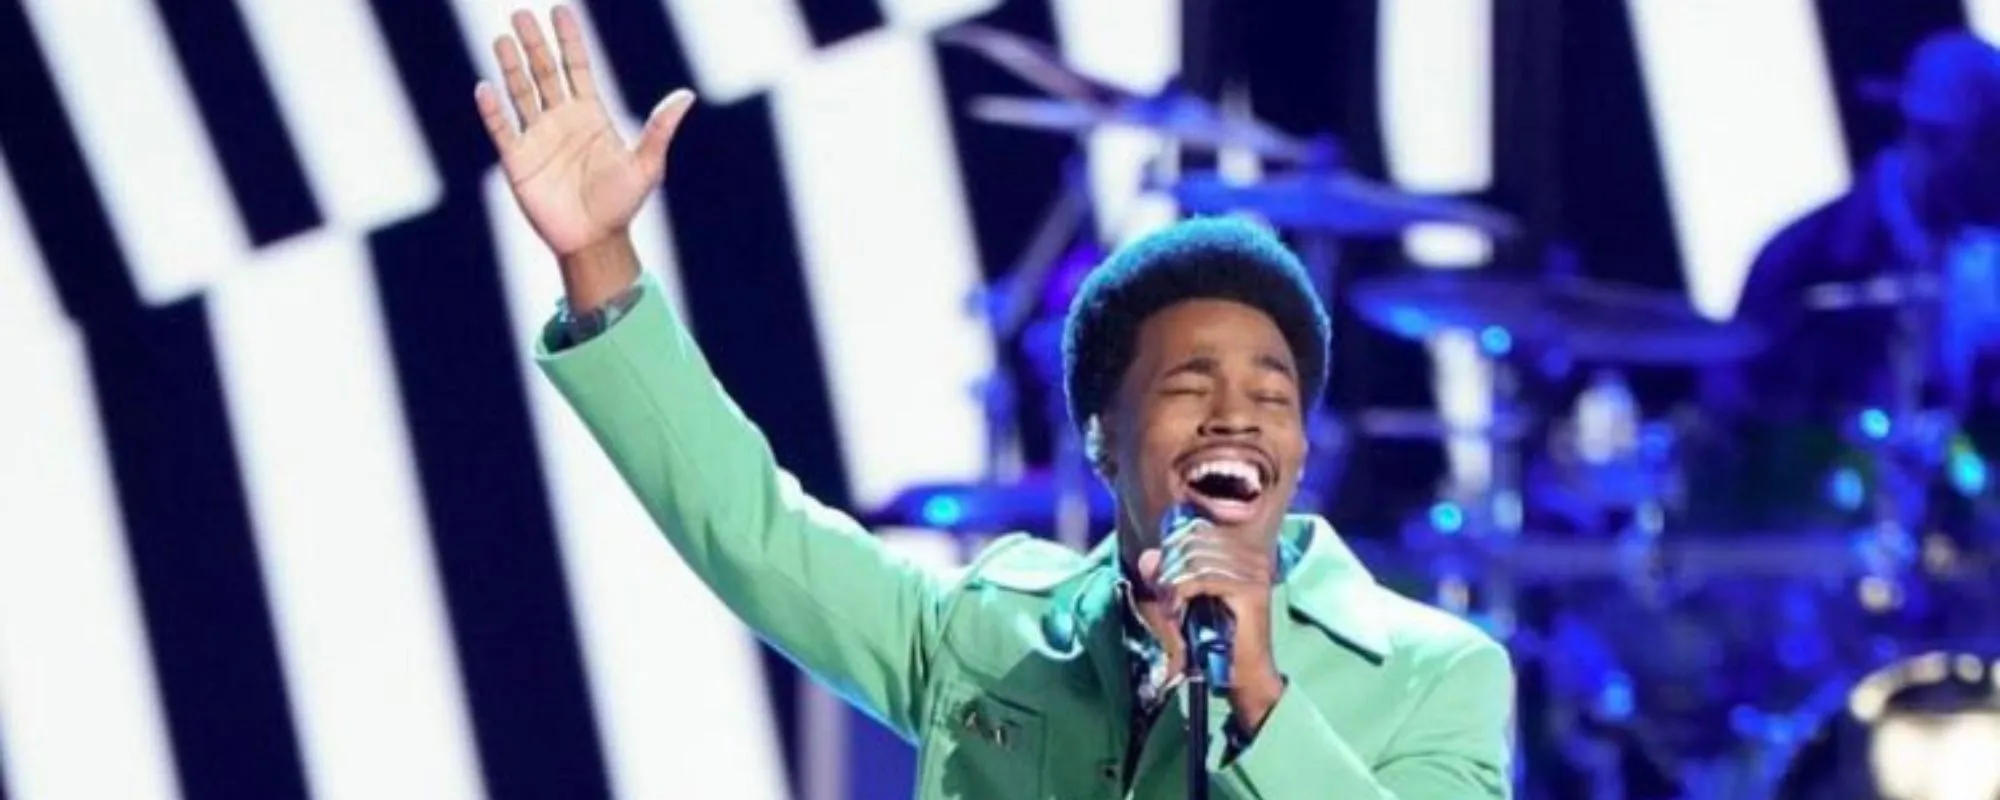 3 Quick Facts About ‘The Voice’ Finalist Nathan Chester